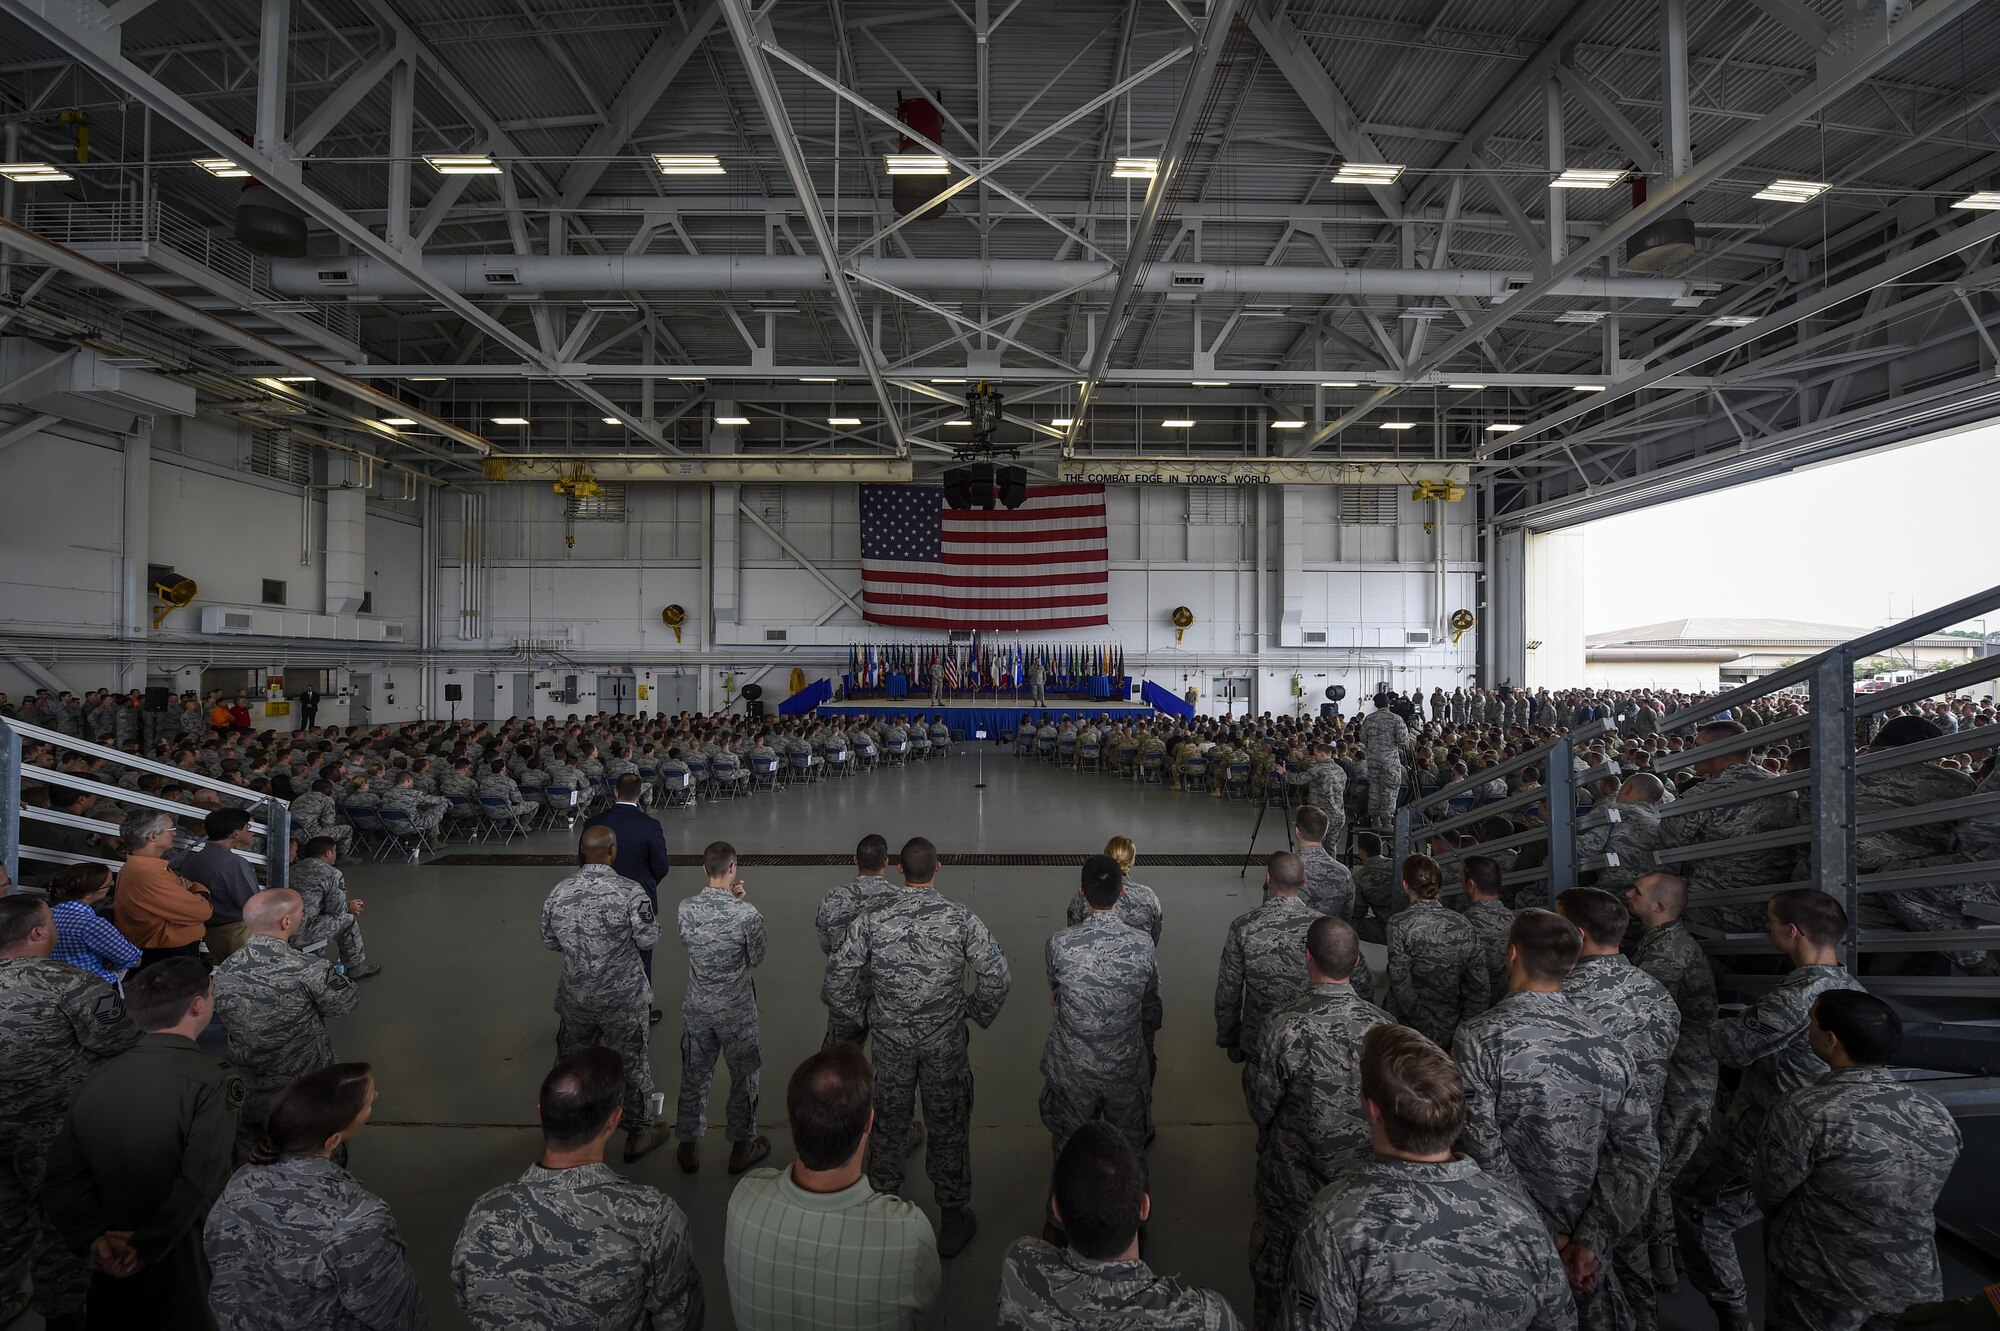 Air Force Chief of Staff Gen. Mark A. Welsh III and Chief Master Sgt. of the Air Force James A. Cody speak to Airmen during an Airmen’s Call at Freedom Hangar on Hurlburt Field, Fla., Sept. 30, 2015. (U.S. Air Force photo by Airman Kai White)